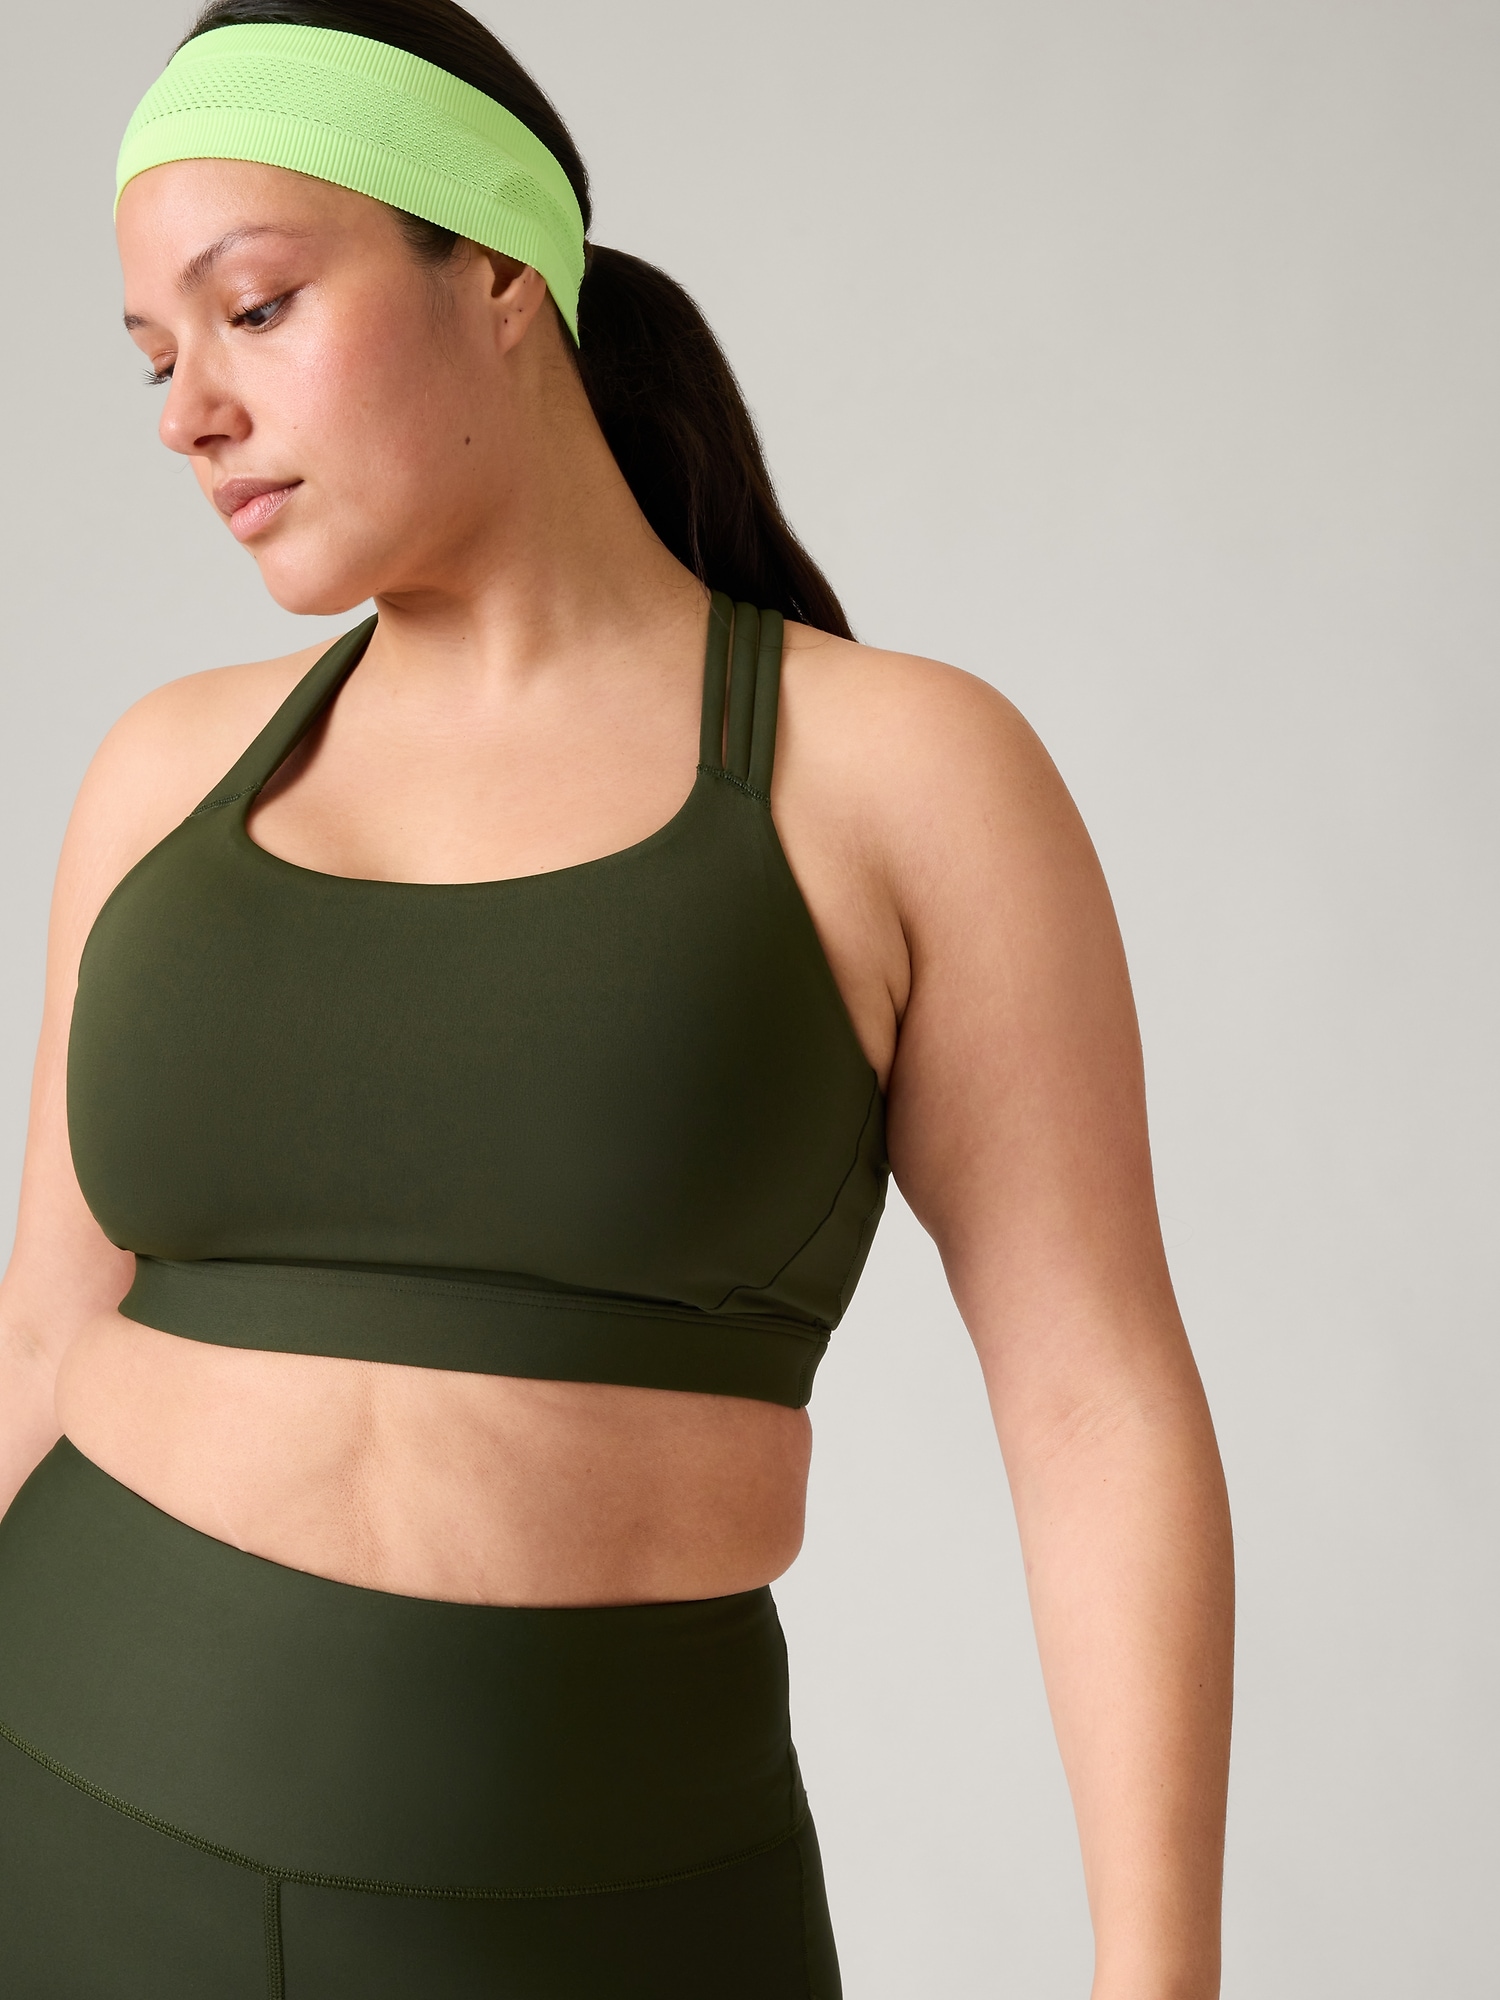 Athleta Ultimate Sports Bra - Size 1X (Cups D-DD) - Light Green - NWT - $32  New With Tags - From Sarah